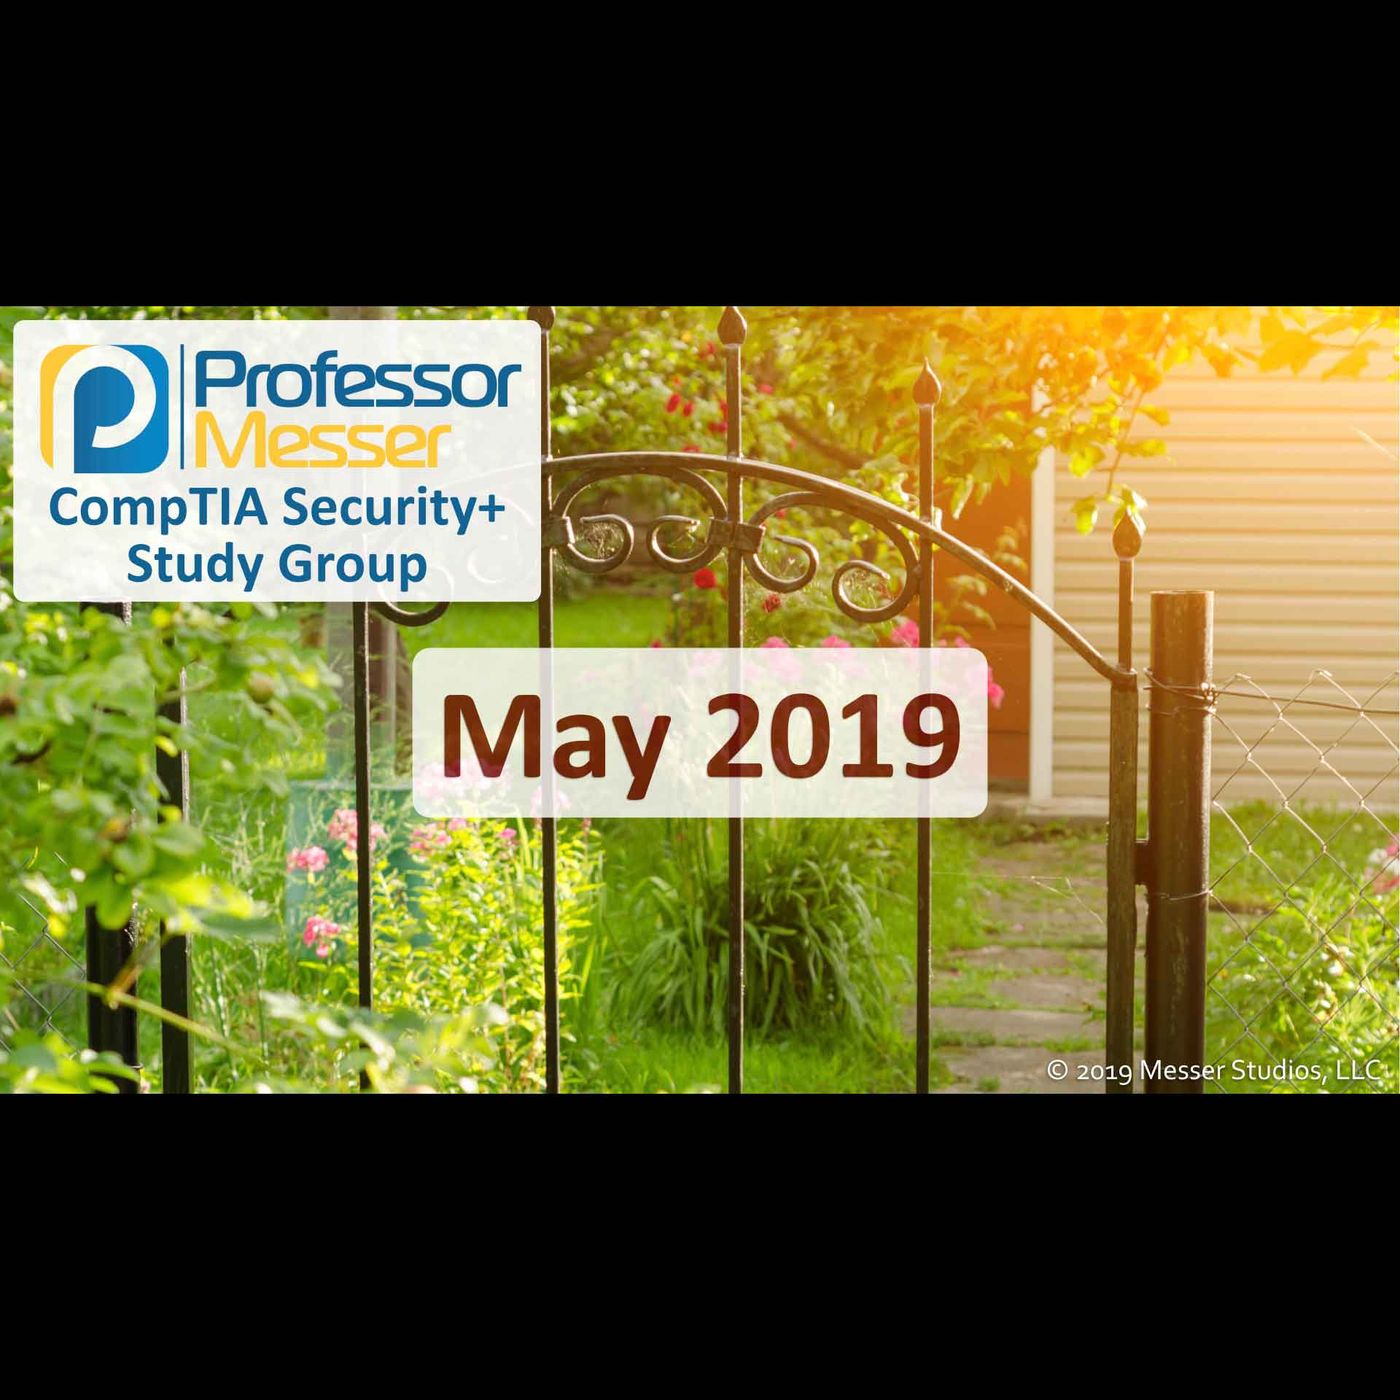 Professor Messer's Security+ Study Group - May 2019